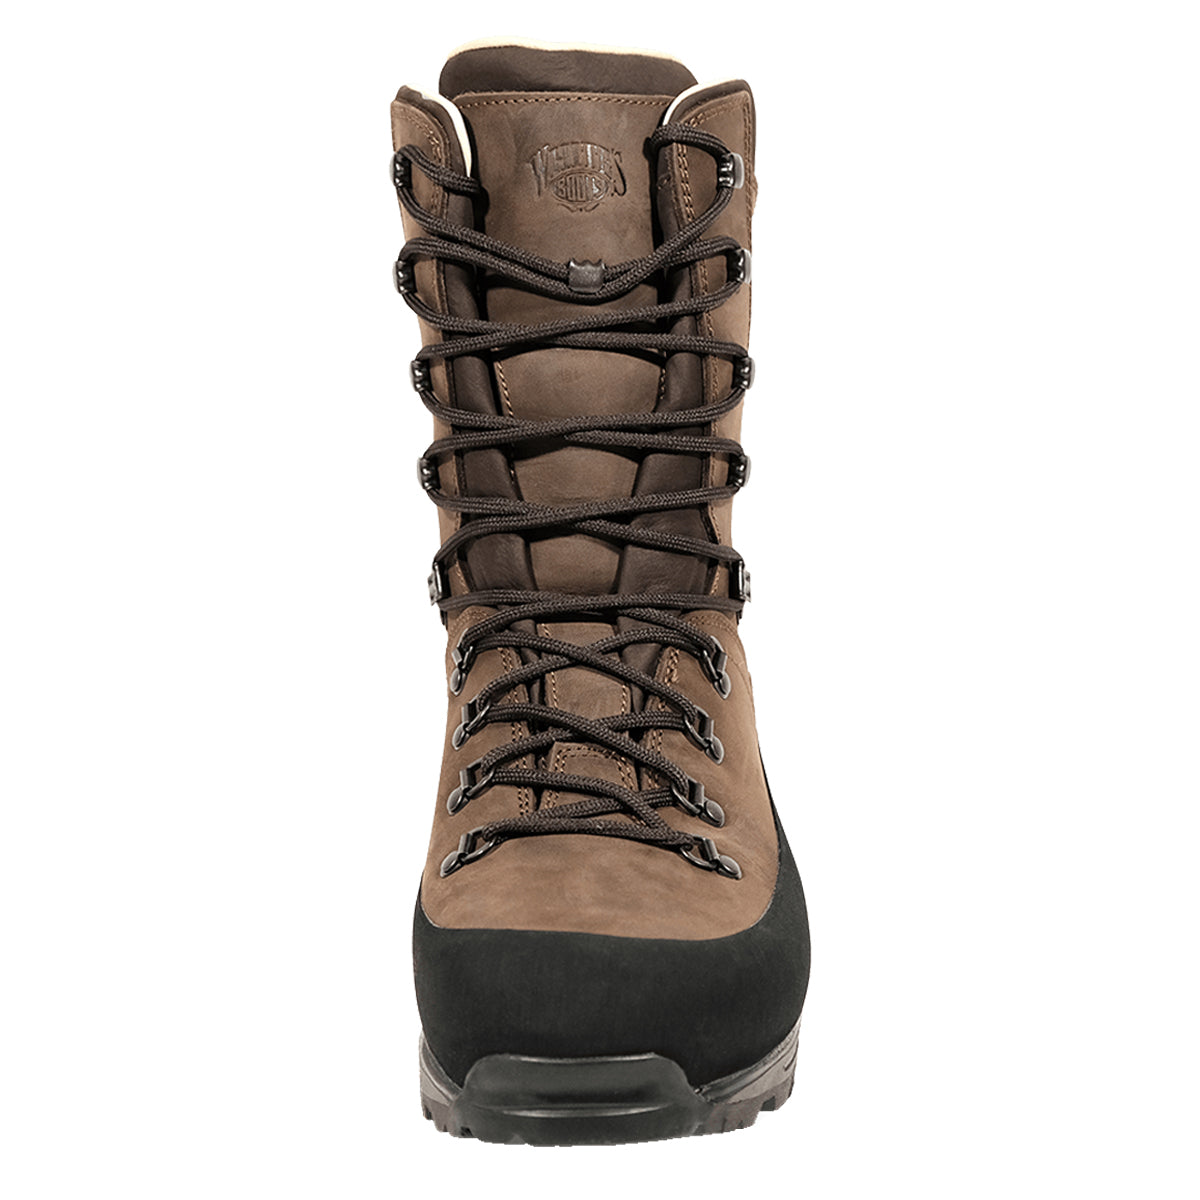 White's Lochsa Grande Ronde Series Insulated in  by GOHUNT | White's Boots - GOHUNT Shop